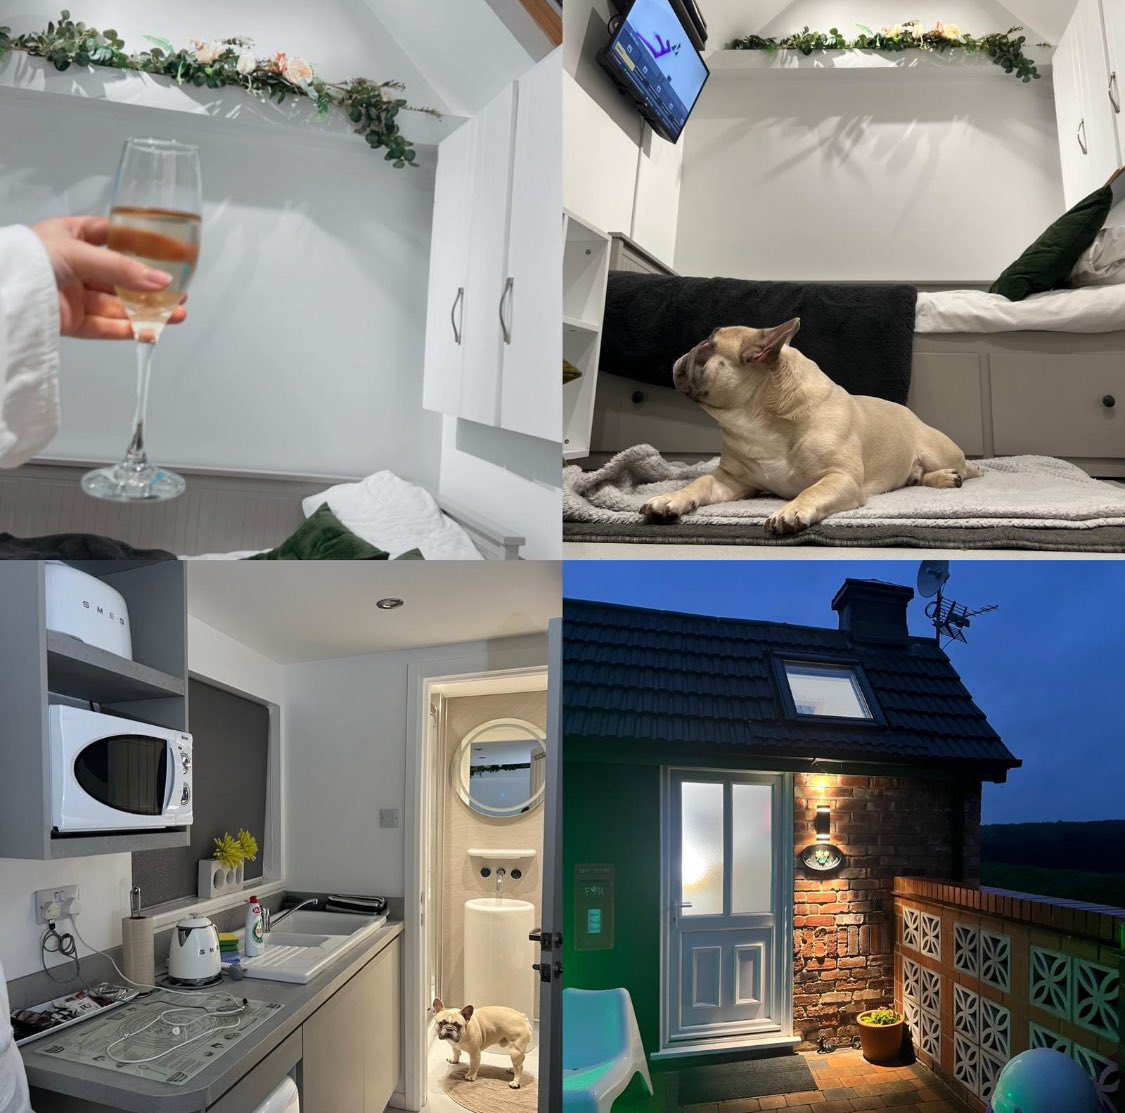 Guest sent pictures cosy night @littlehouse with pooch 🐾🏡 ❤️ #LincolnHoliday #lincolnshire #lincolncityholiday #LincsConnect #greatplacetostayinlincoln #pullupandstay